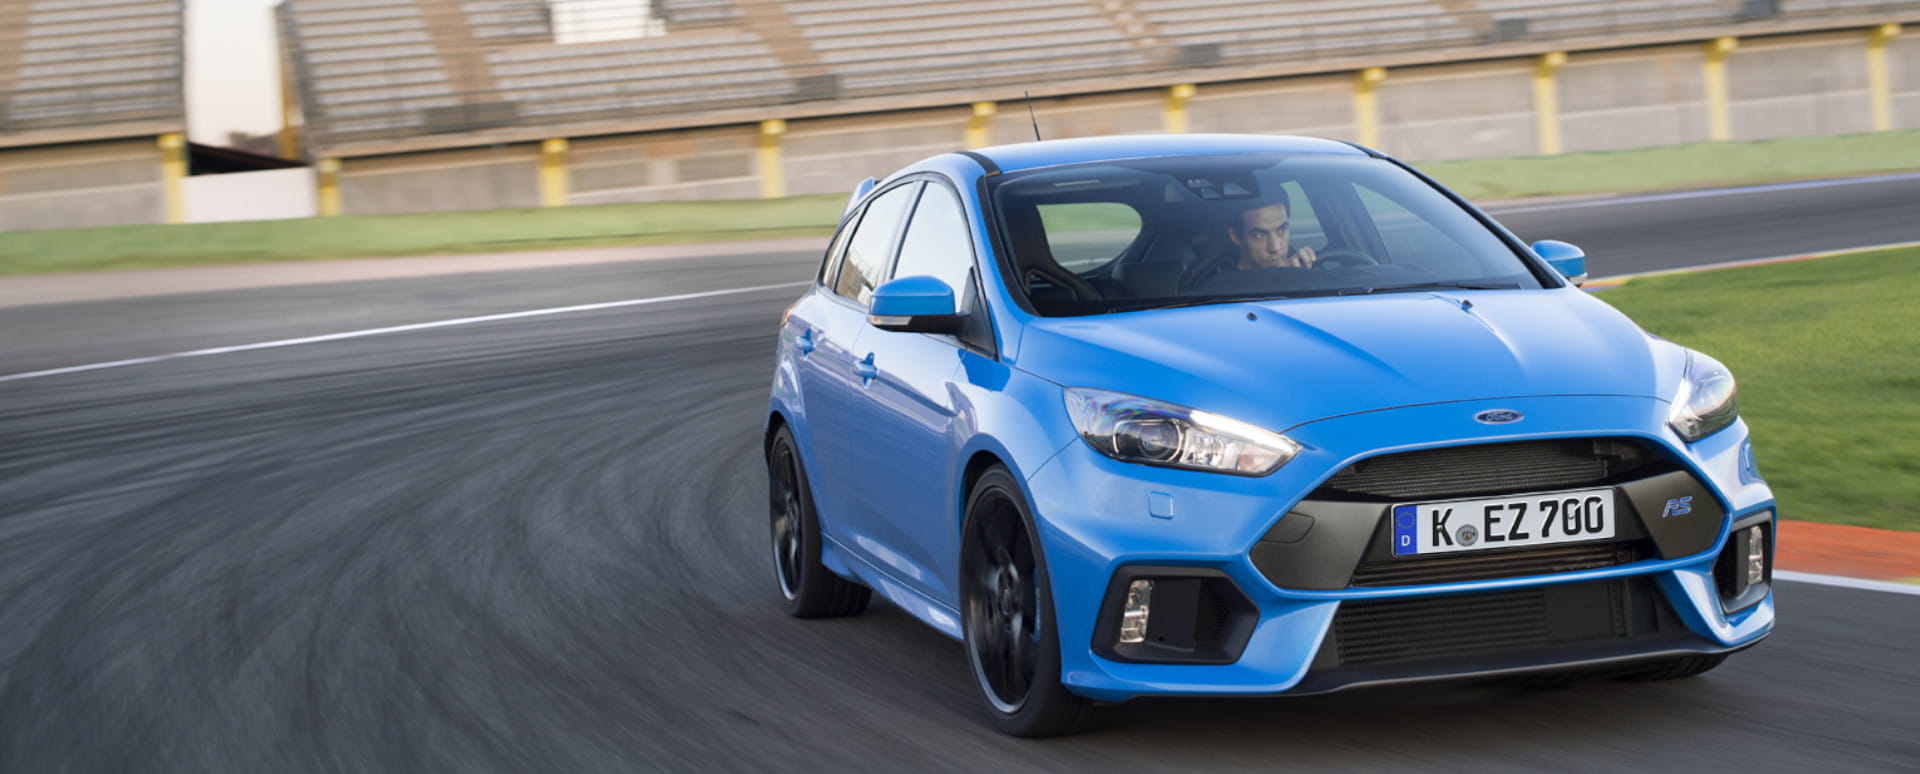 Blue Ford Focus RS Exterior Track